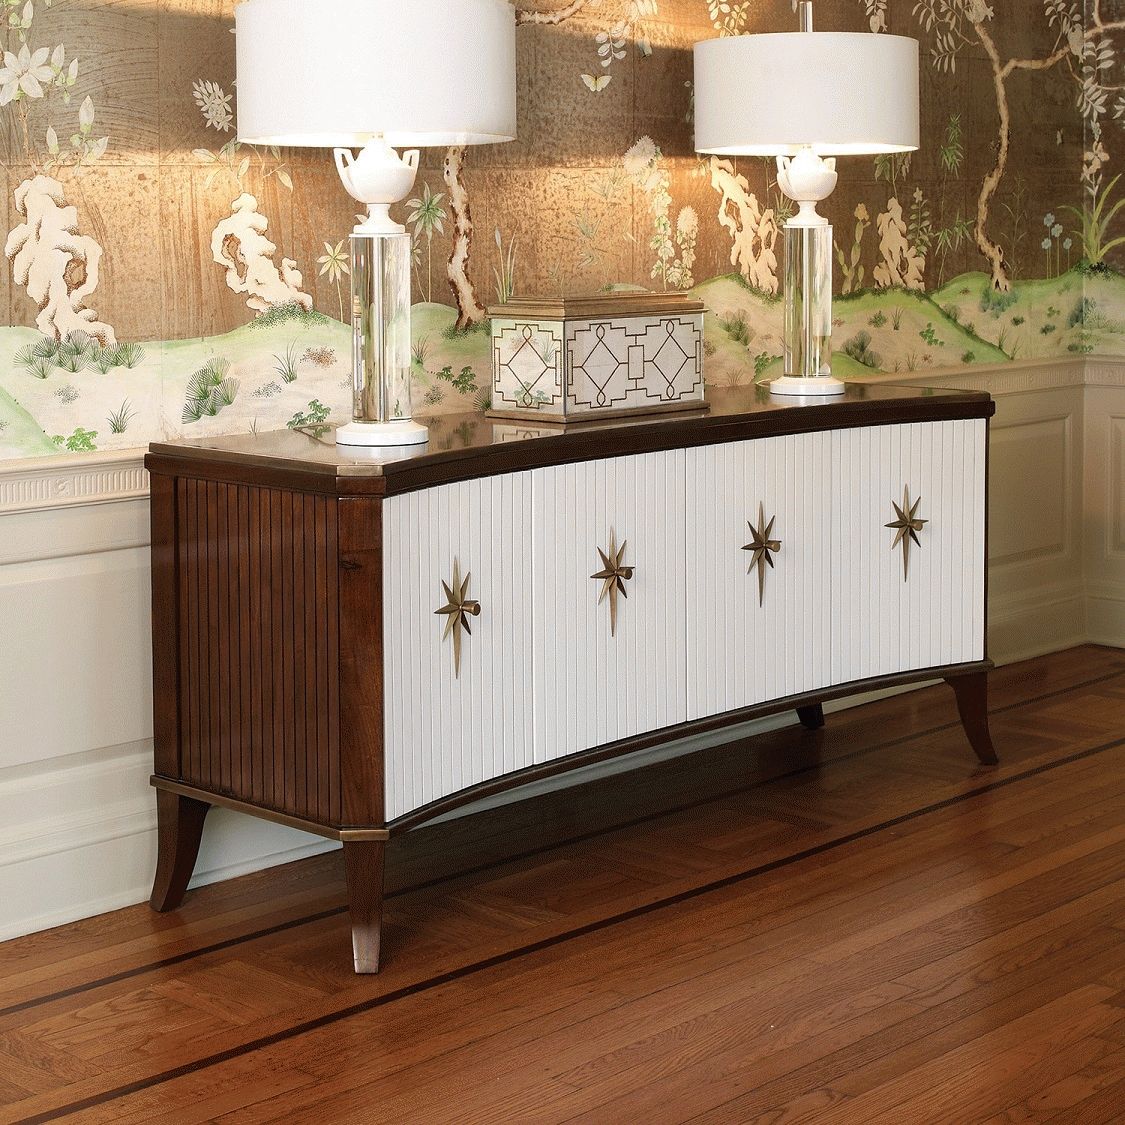 Designer Sideboard, Designer Sideboards, Designer Sideboard With Regard To White And Walnut Sideboards (View 11 of 15)